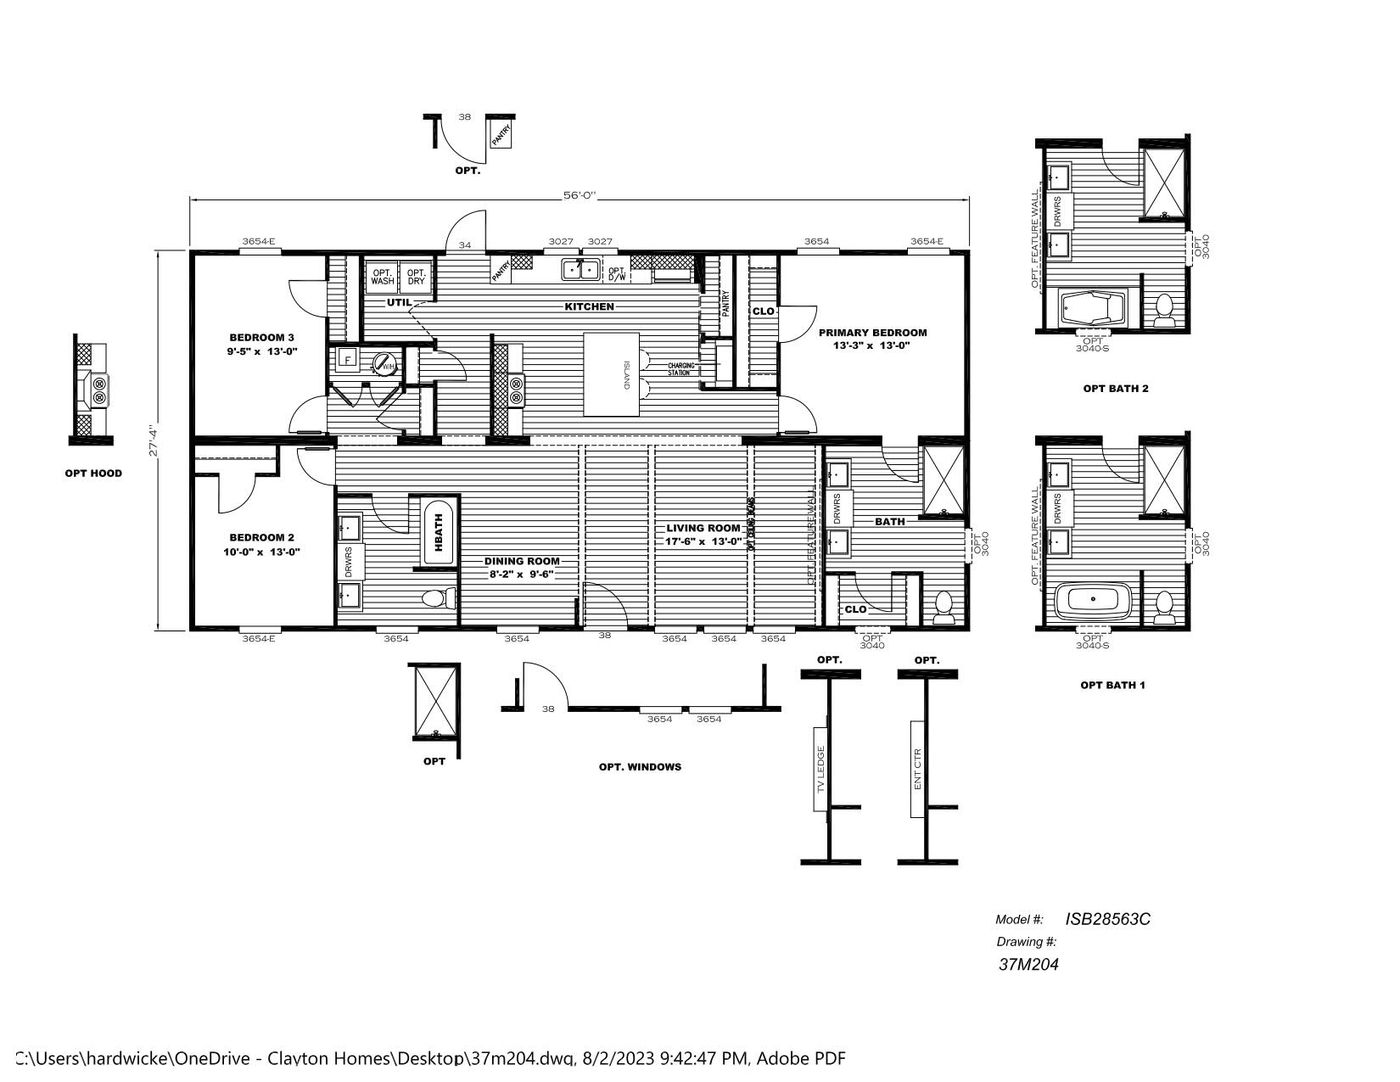 The SAVANNAH BREEZE Floor Plan. This Home features 3 bedrooms and 2 baths.